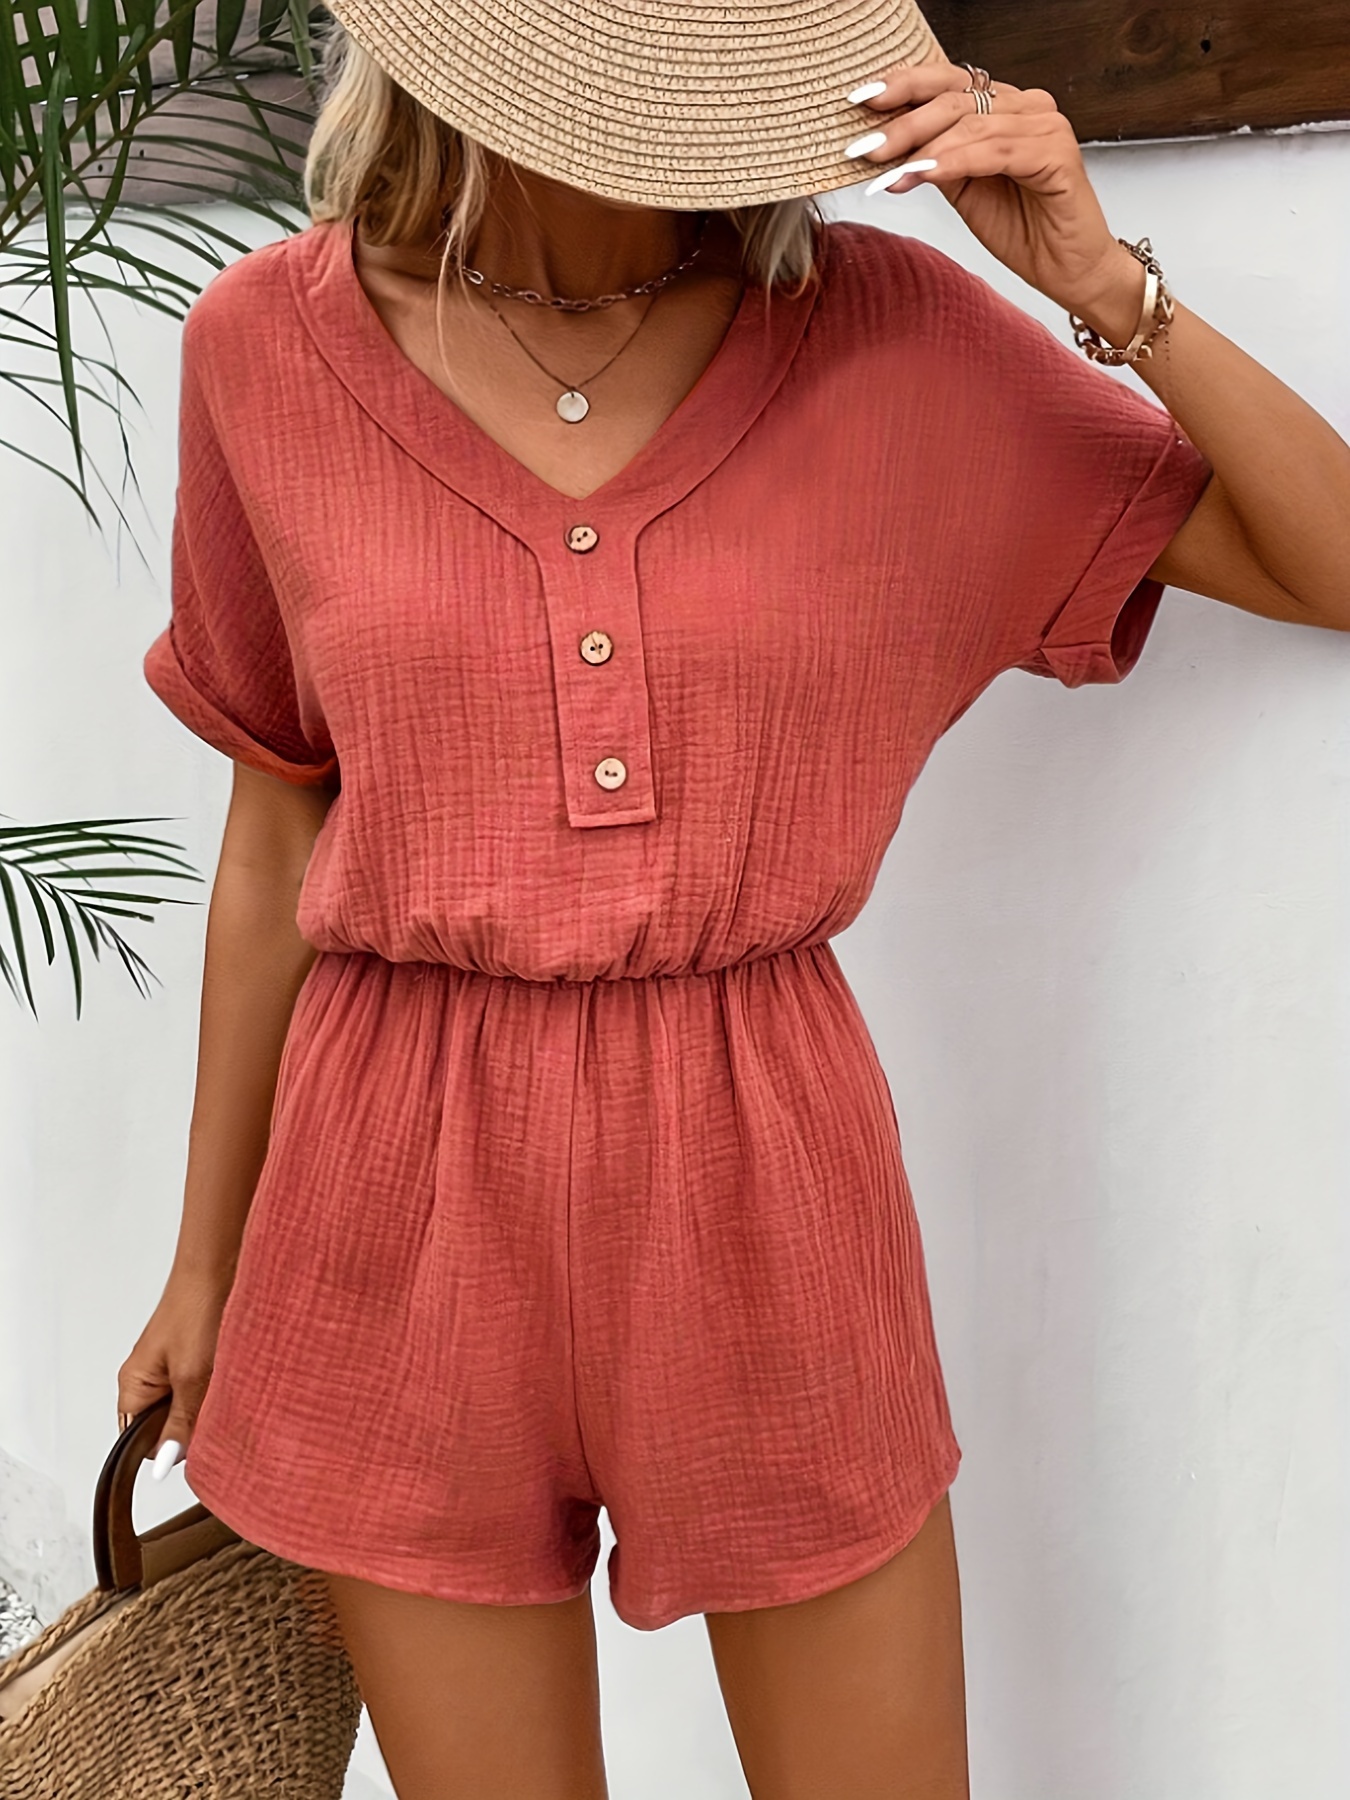 Solid Square Neck Romper Jumpsuit, Sexy Short Sleeve Romper Jumpsuit,  Women's Clothing